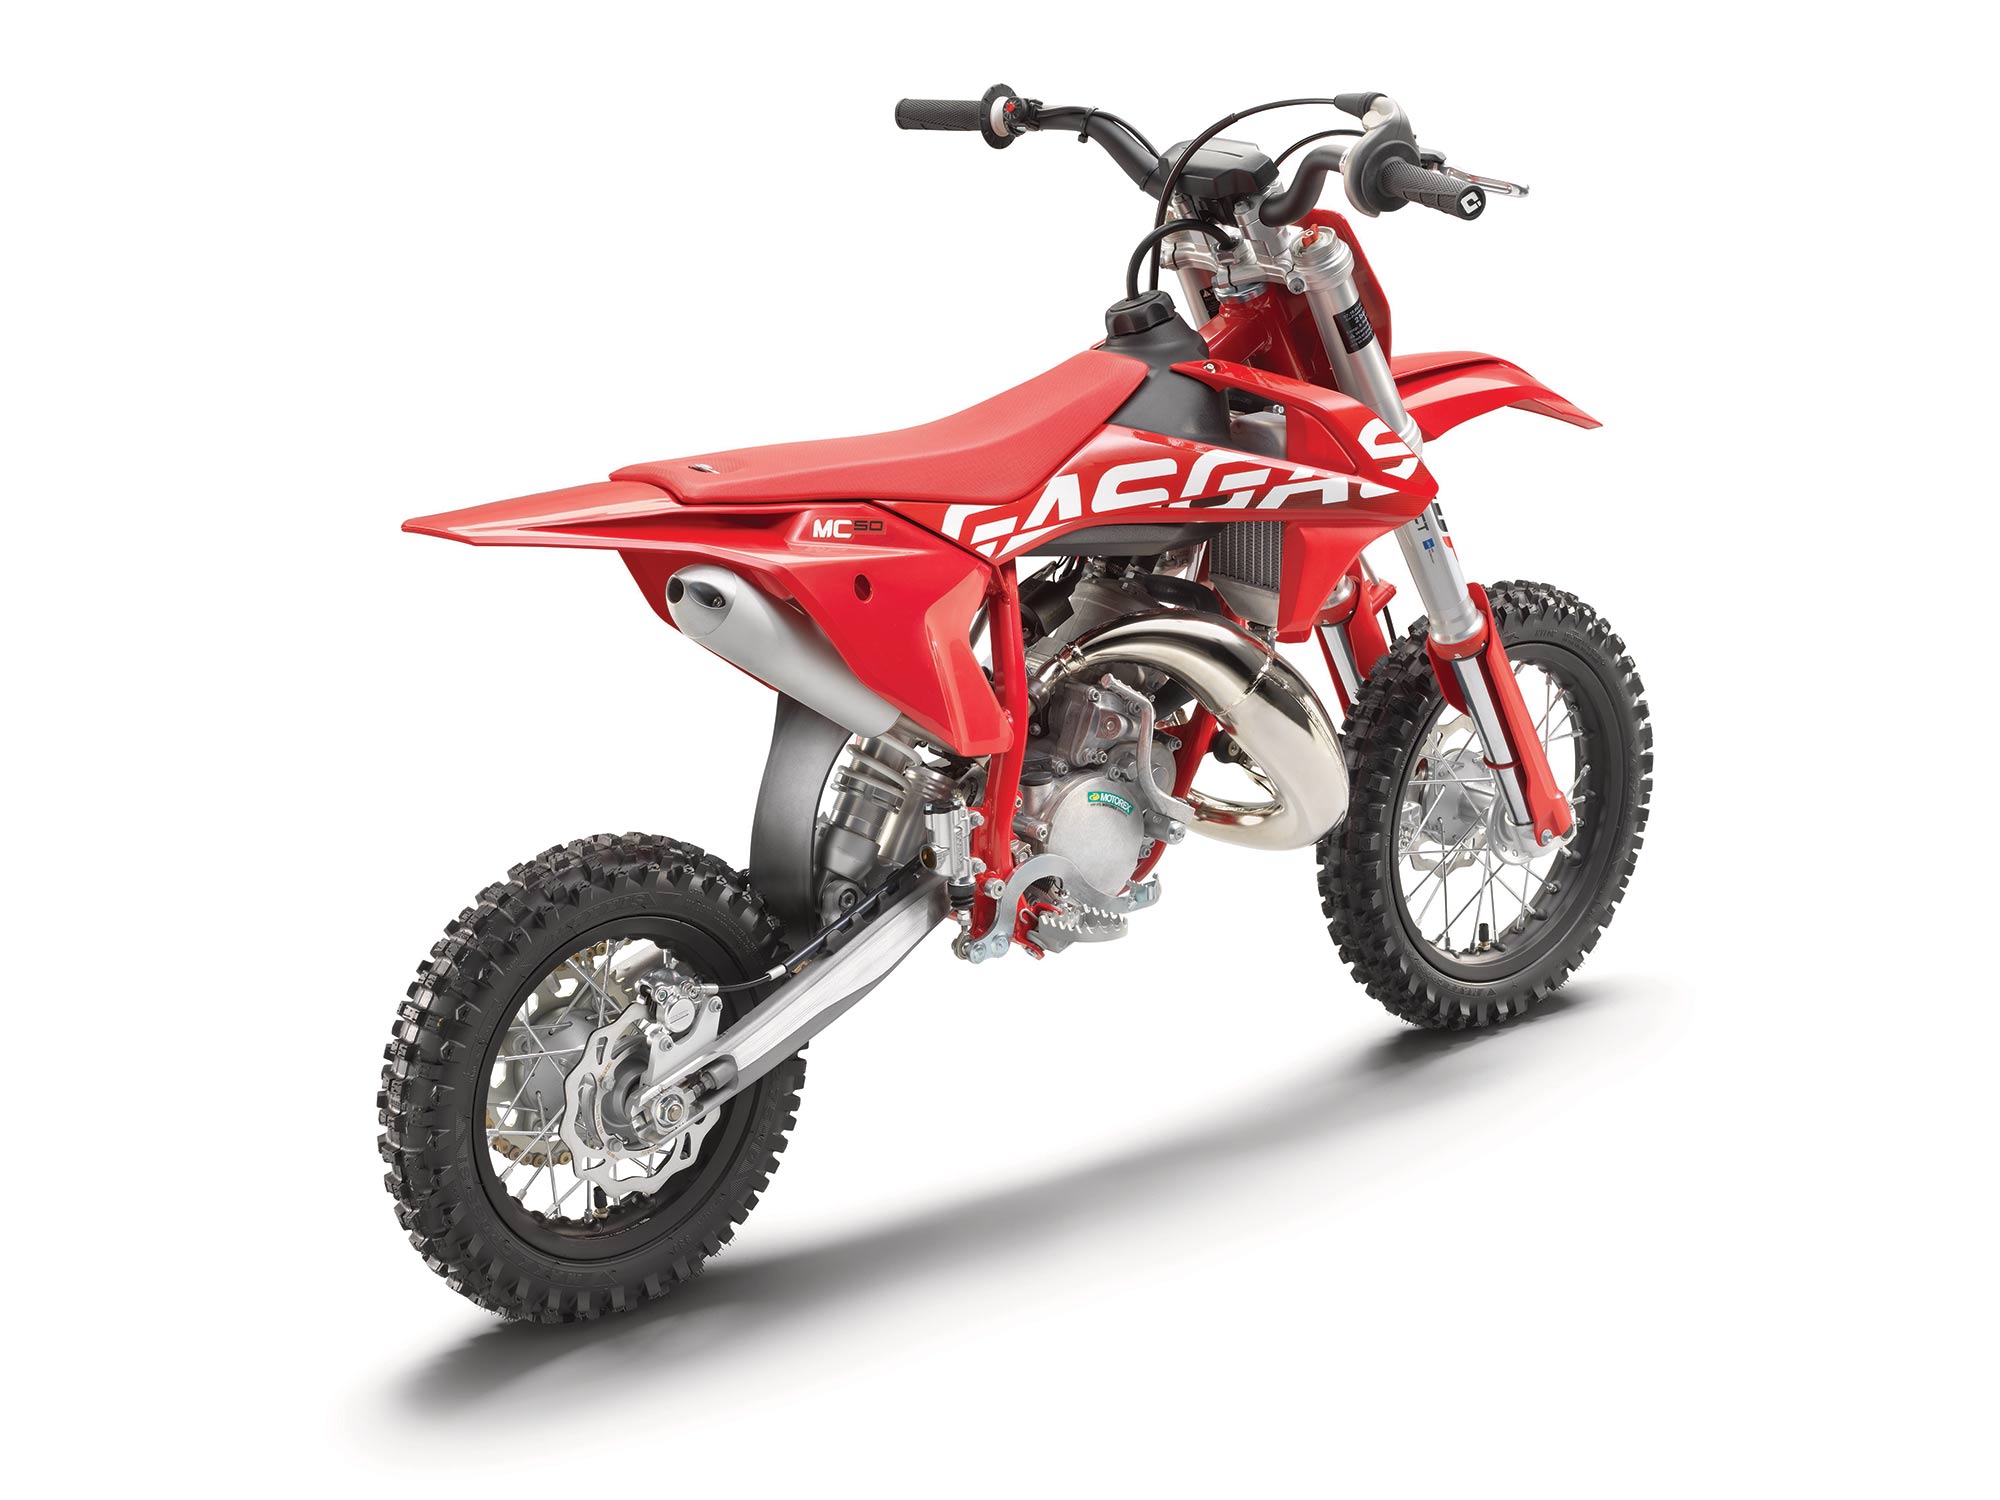 50cc adult dirt bikes, 50cc adult dirt bikes Suppliers and Manufacturers at